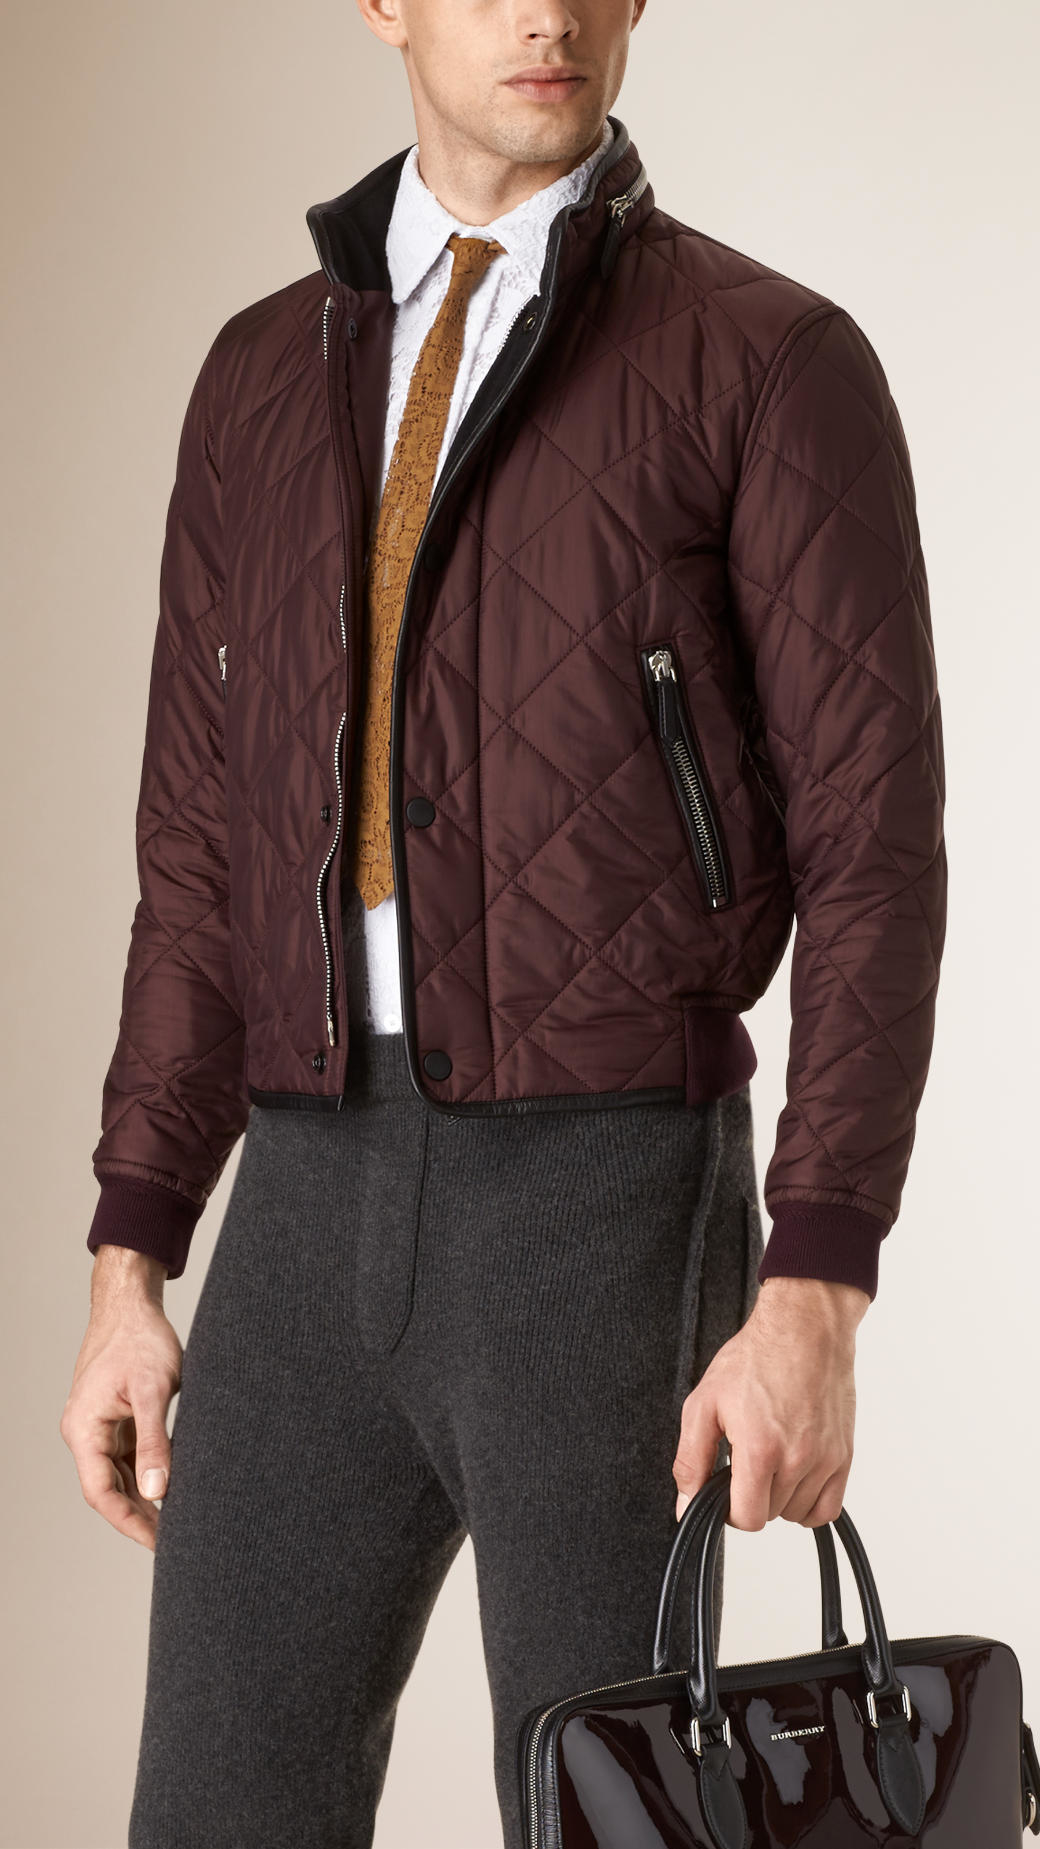 Burberry Quilted Bomber Jacket in Purple for Men - Lyst